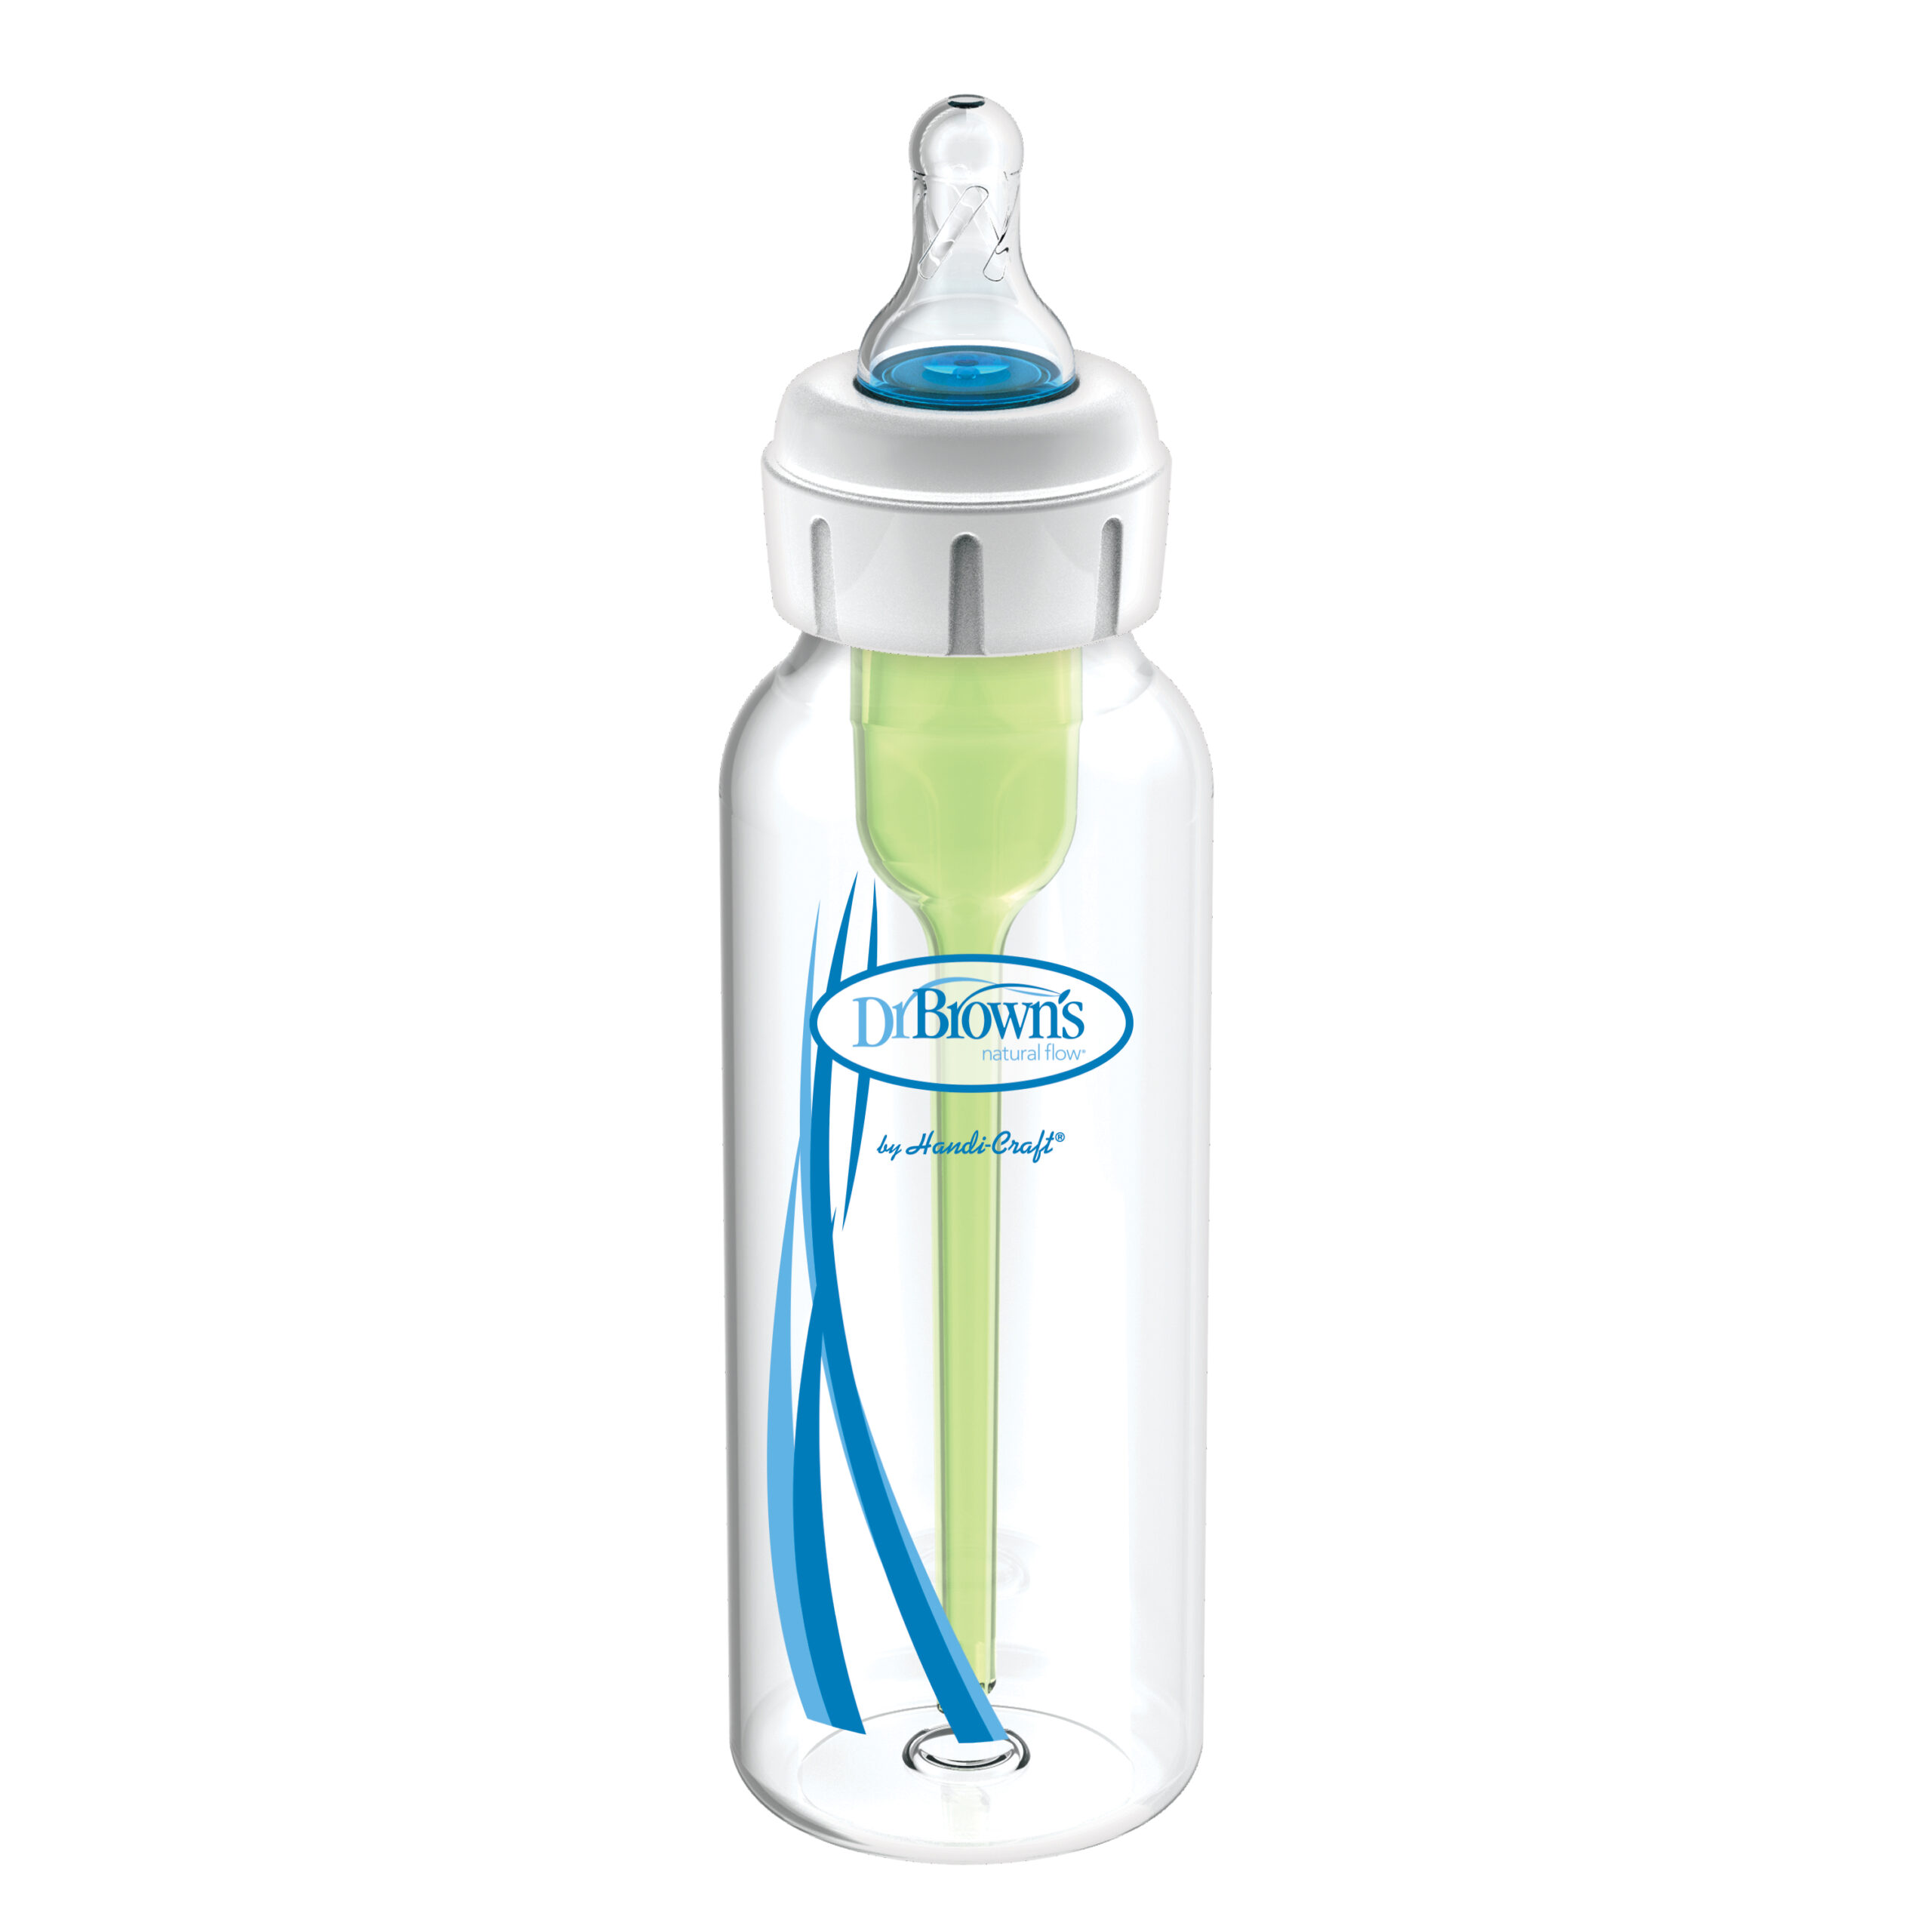 https://www.drbrowns.be/wp-content/uploads/2017/01/SB815-MED_Product_Specialty_Feeding_System_8oz_250ml_Options-_Bottle_valve_shown1-1-scaled.jpg